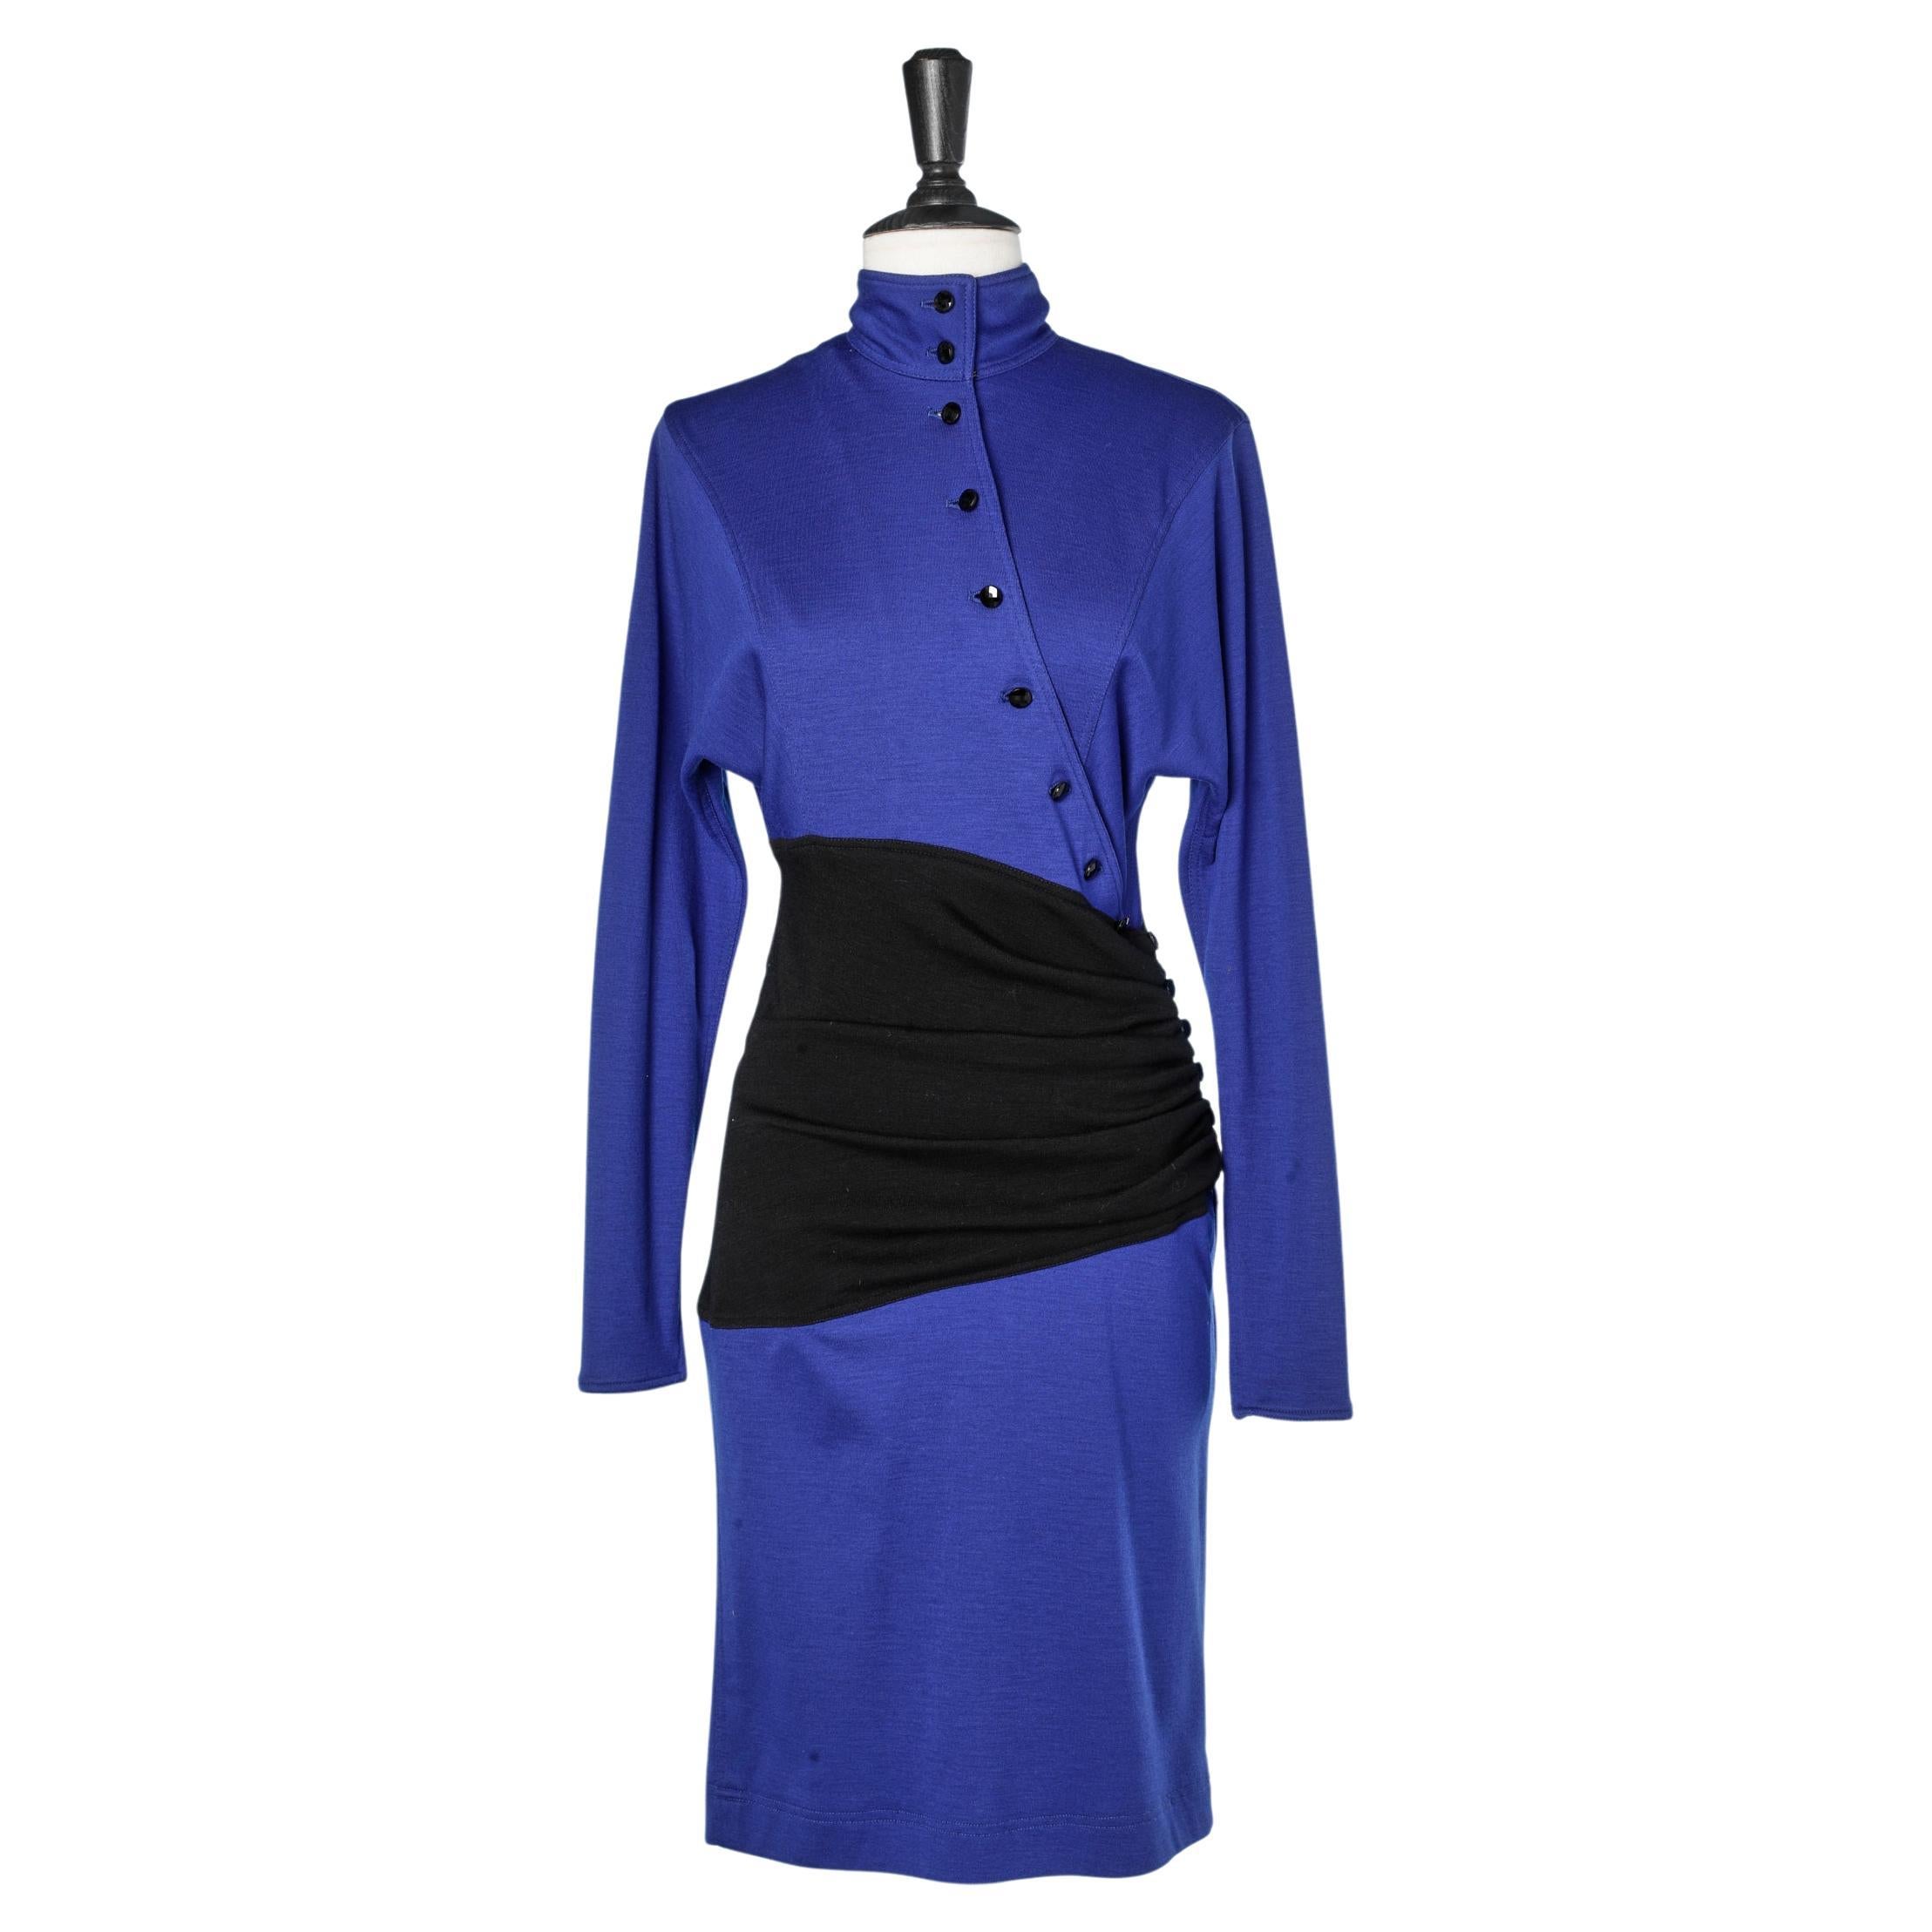 1980's Blue and black asymmetrical wool dress with black buttons Emanuel Ungaro 